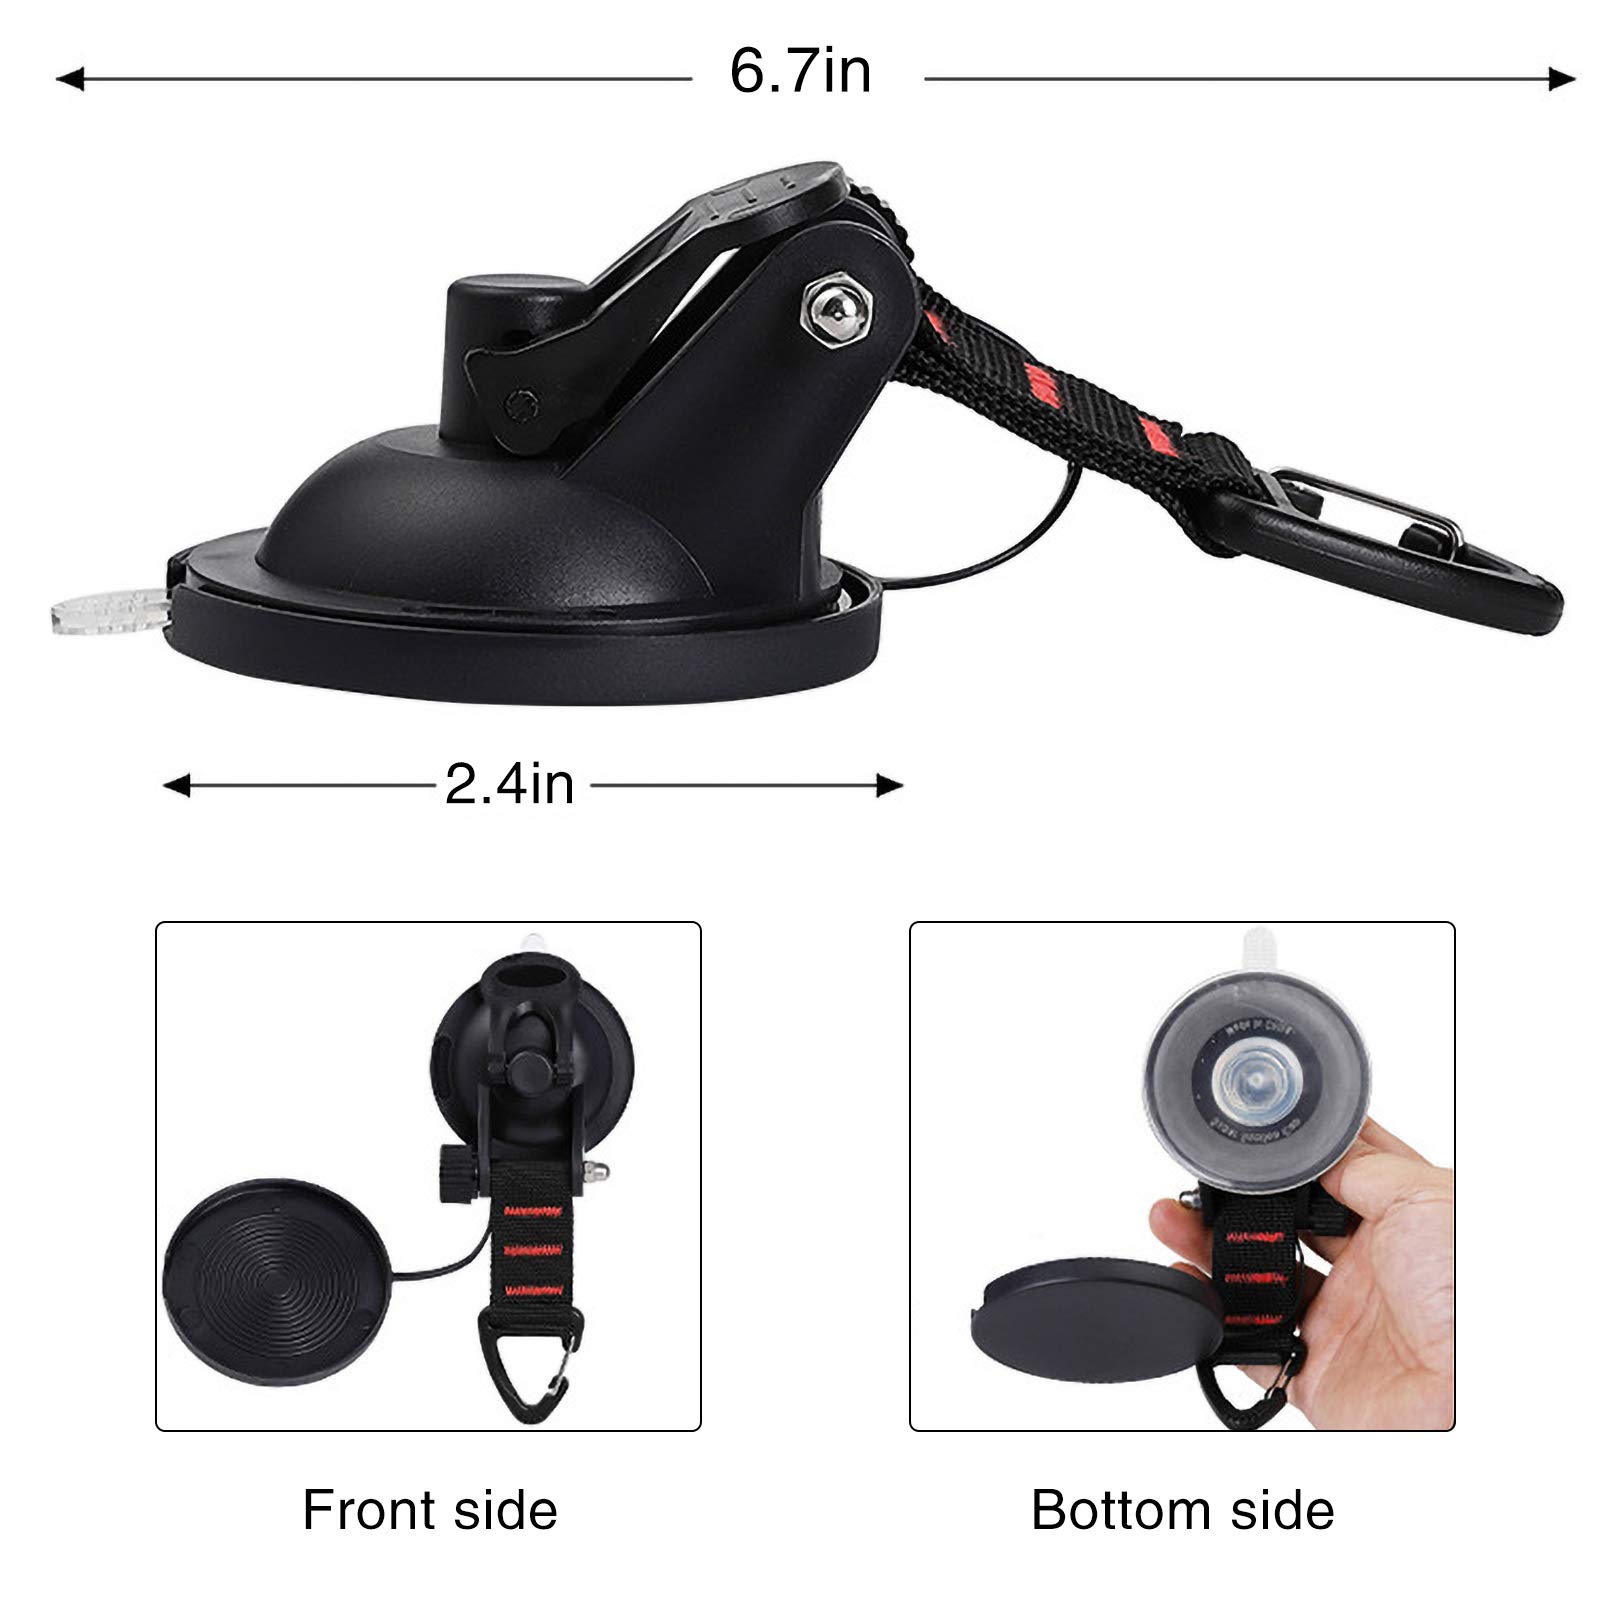 CONBOLA Heavy Duty Suction Cups 2 Pieces with Hooks Upgraded Car Camping Tie Down Suction Cup Camping Tarp Accessory with Securi